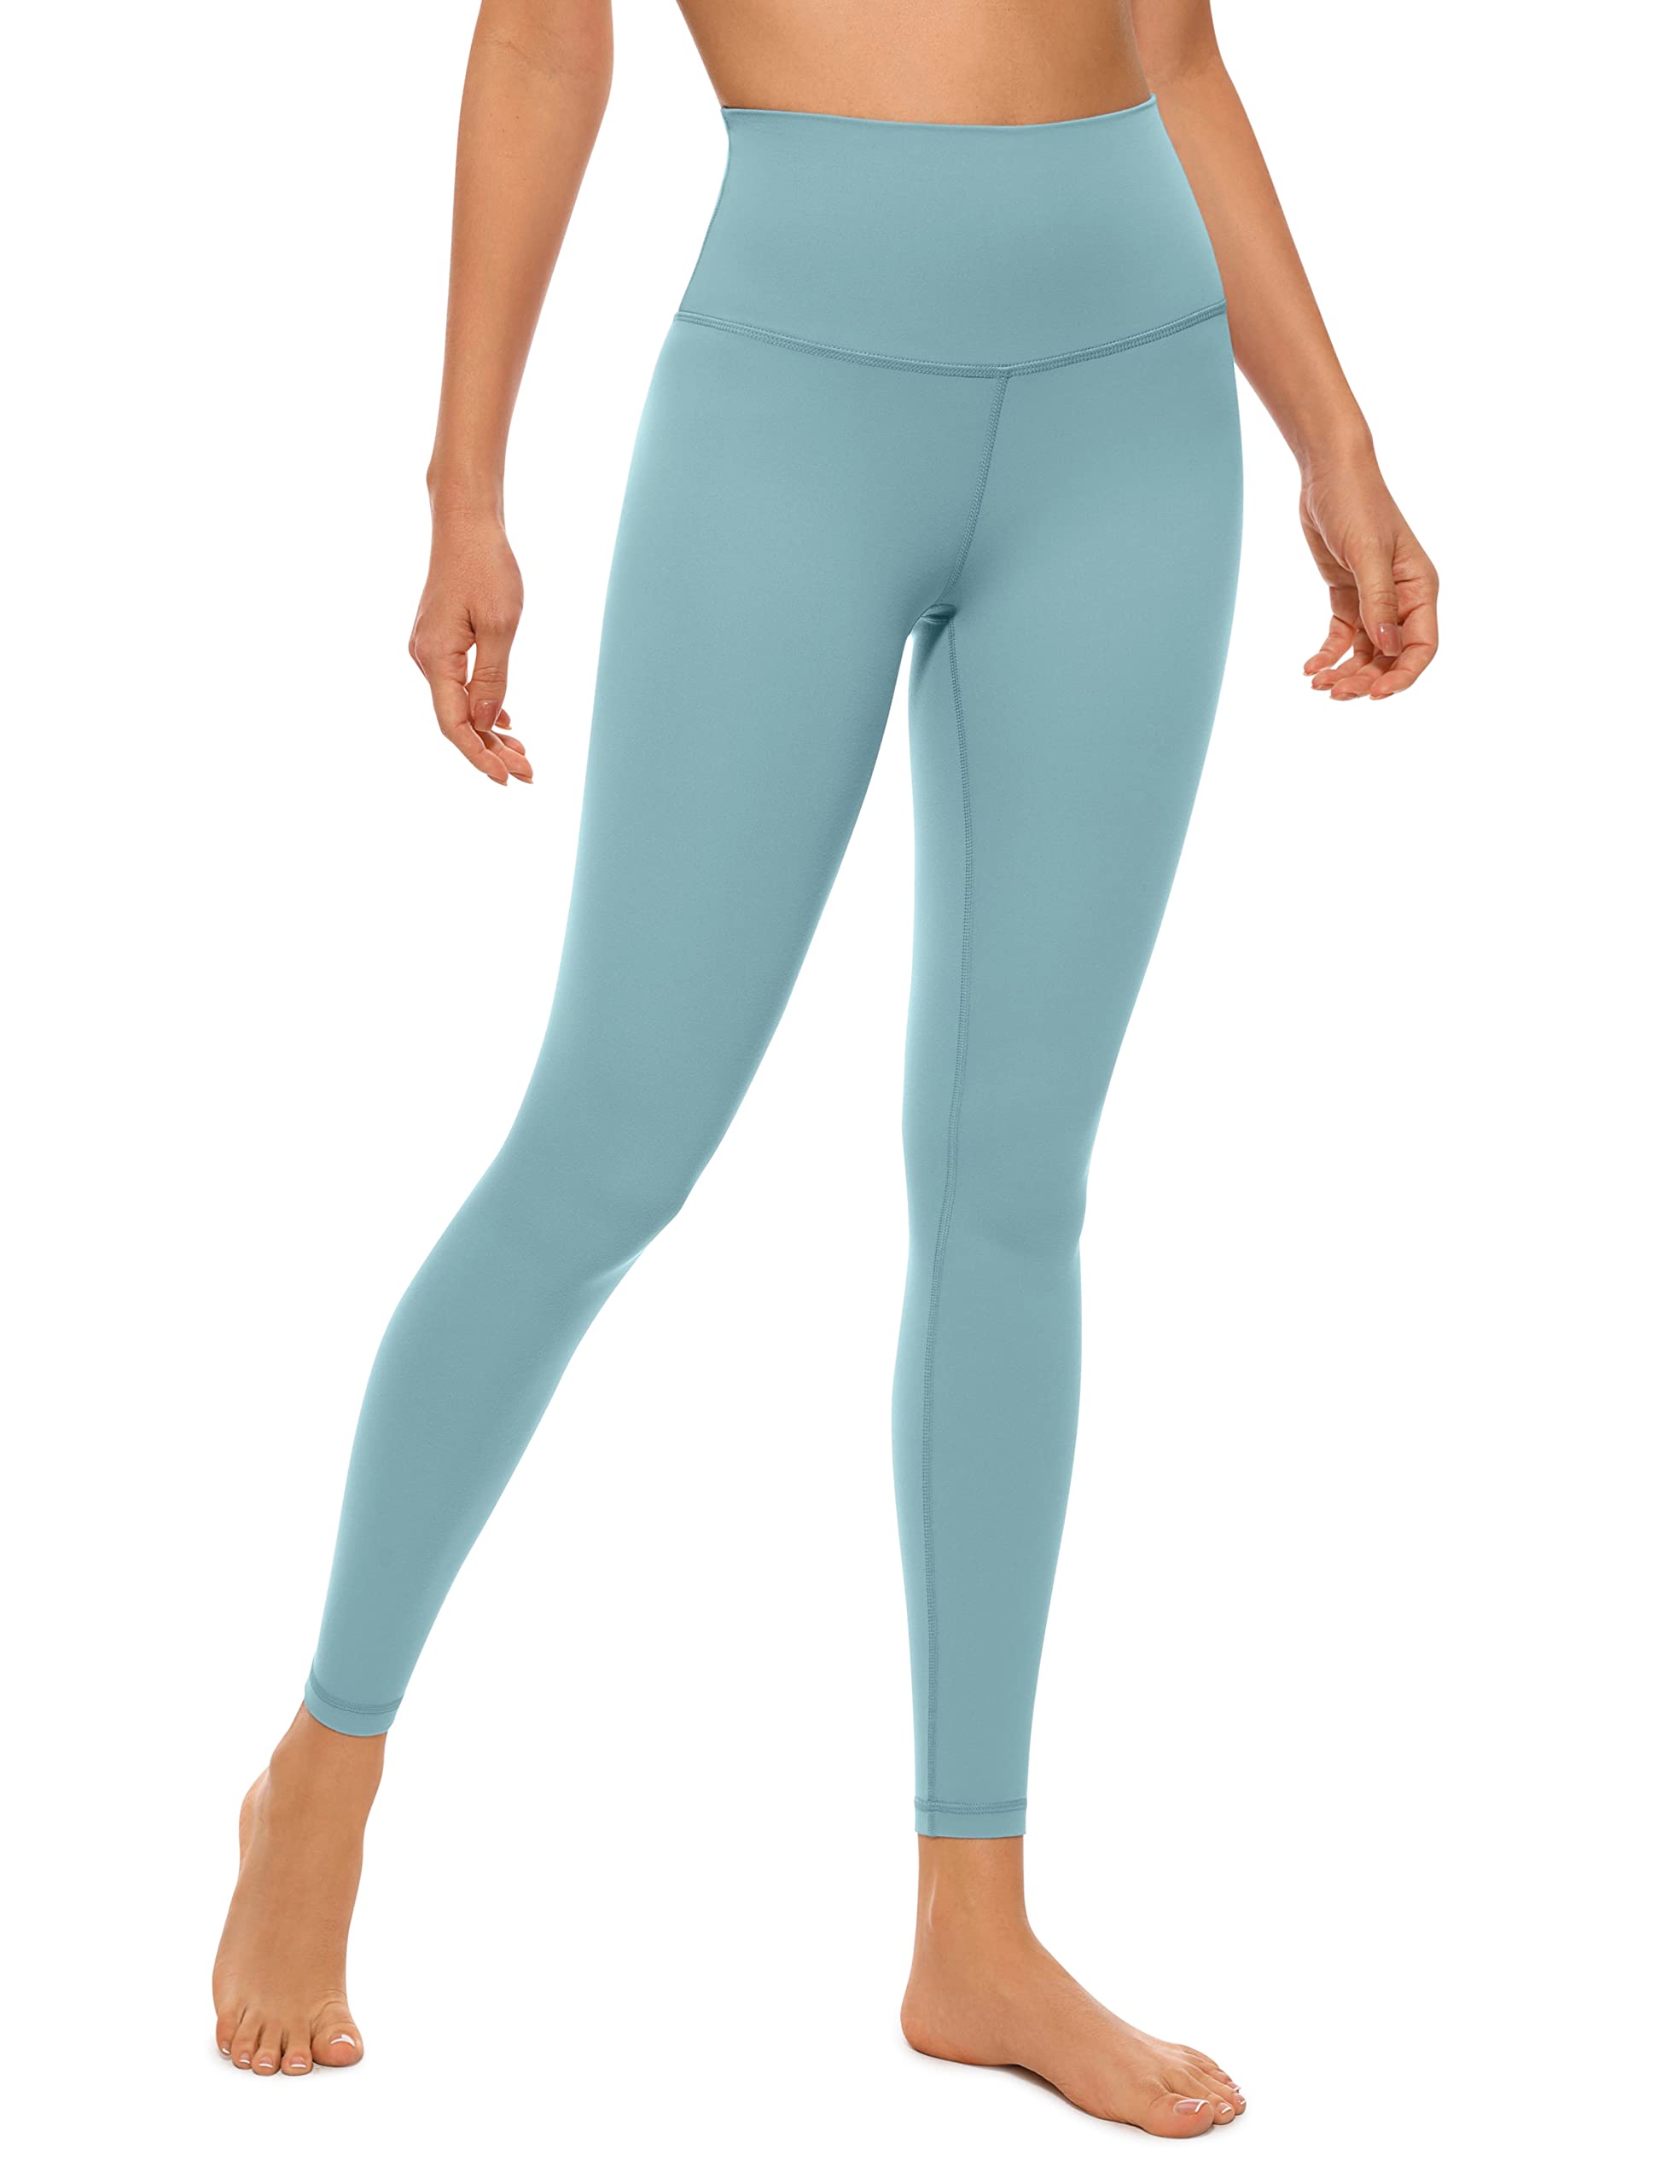 CRZ YOGA cRZ YOgA Butterluxe High Waisted Lounge Legging 25 - Workout  Leggings for Women Buttery Soft Yoga Pants Pure Blue XX-Small